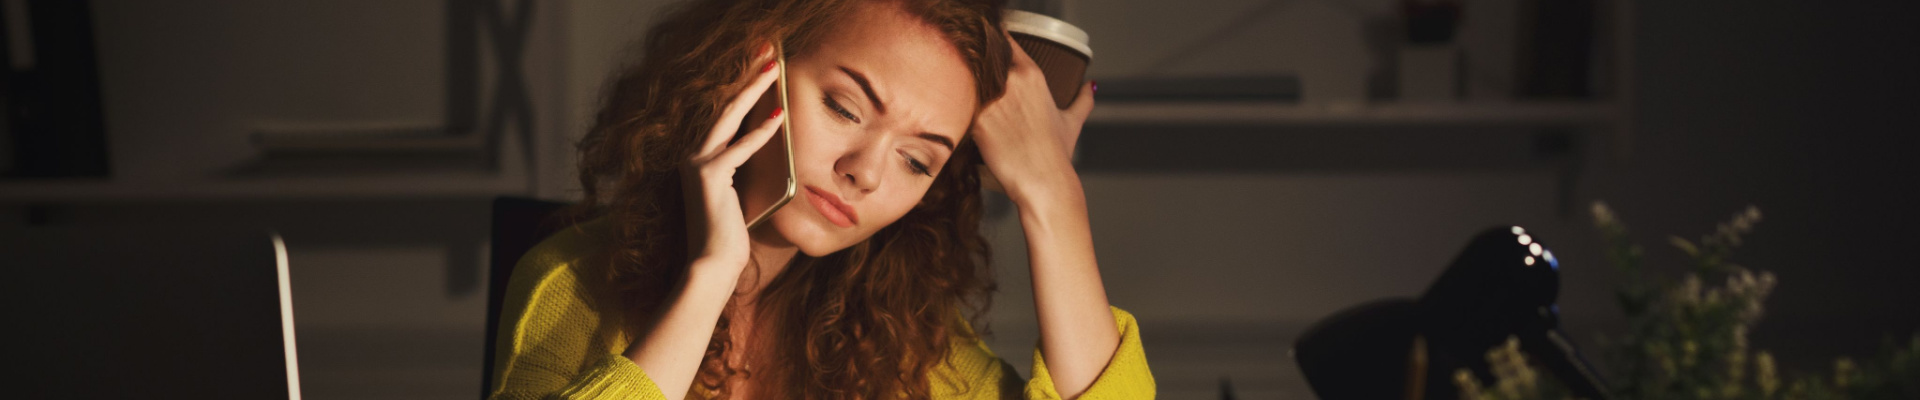 Woman looking stressed in an office on her phone holding a coffee